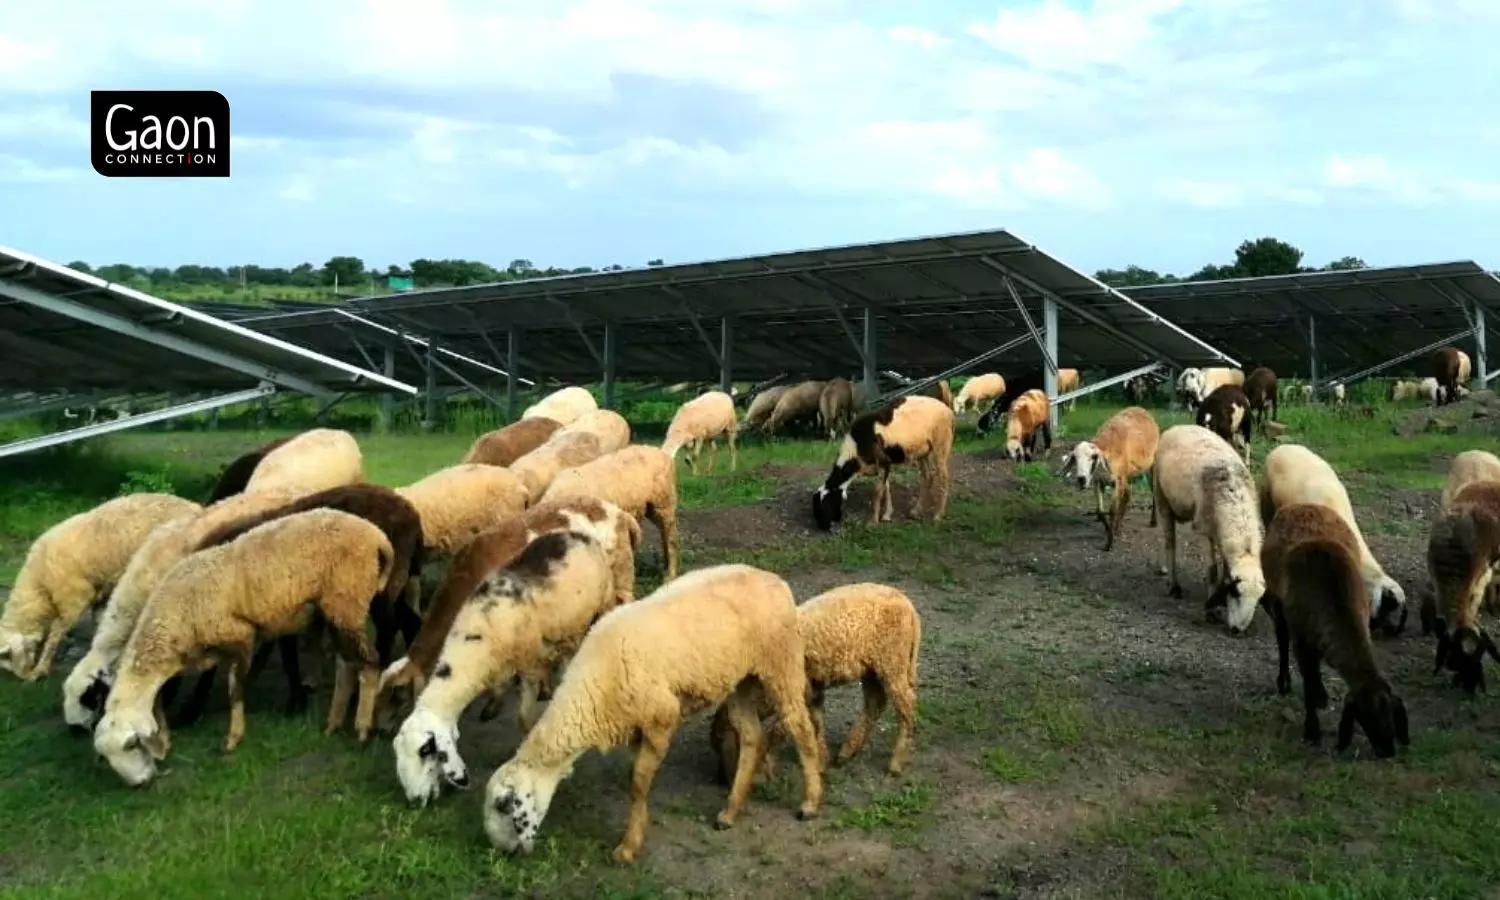 Solar projects that generate green power, and also support farming and grazing